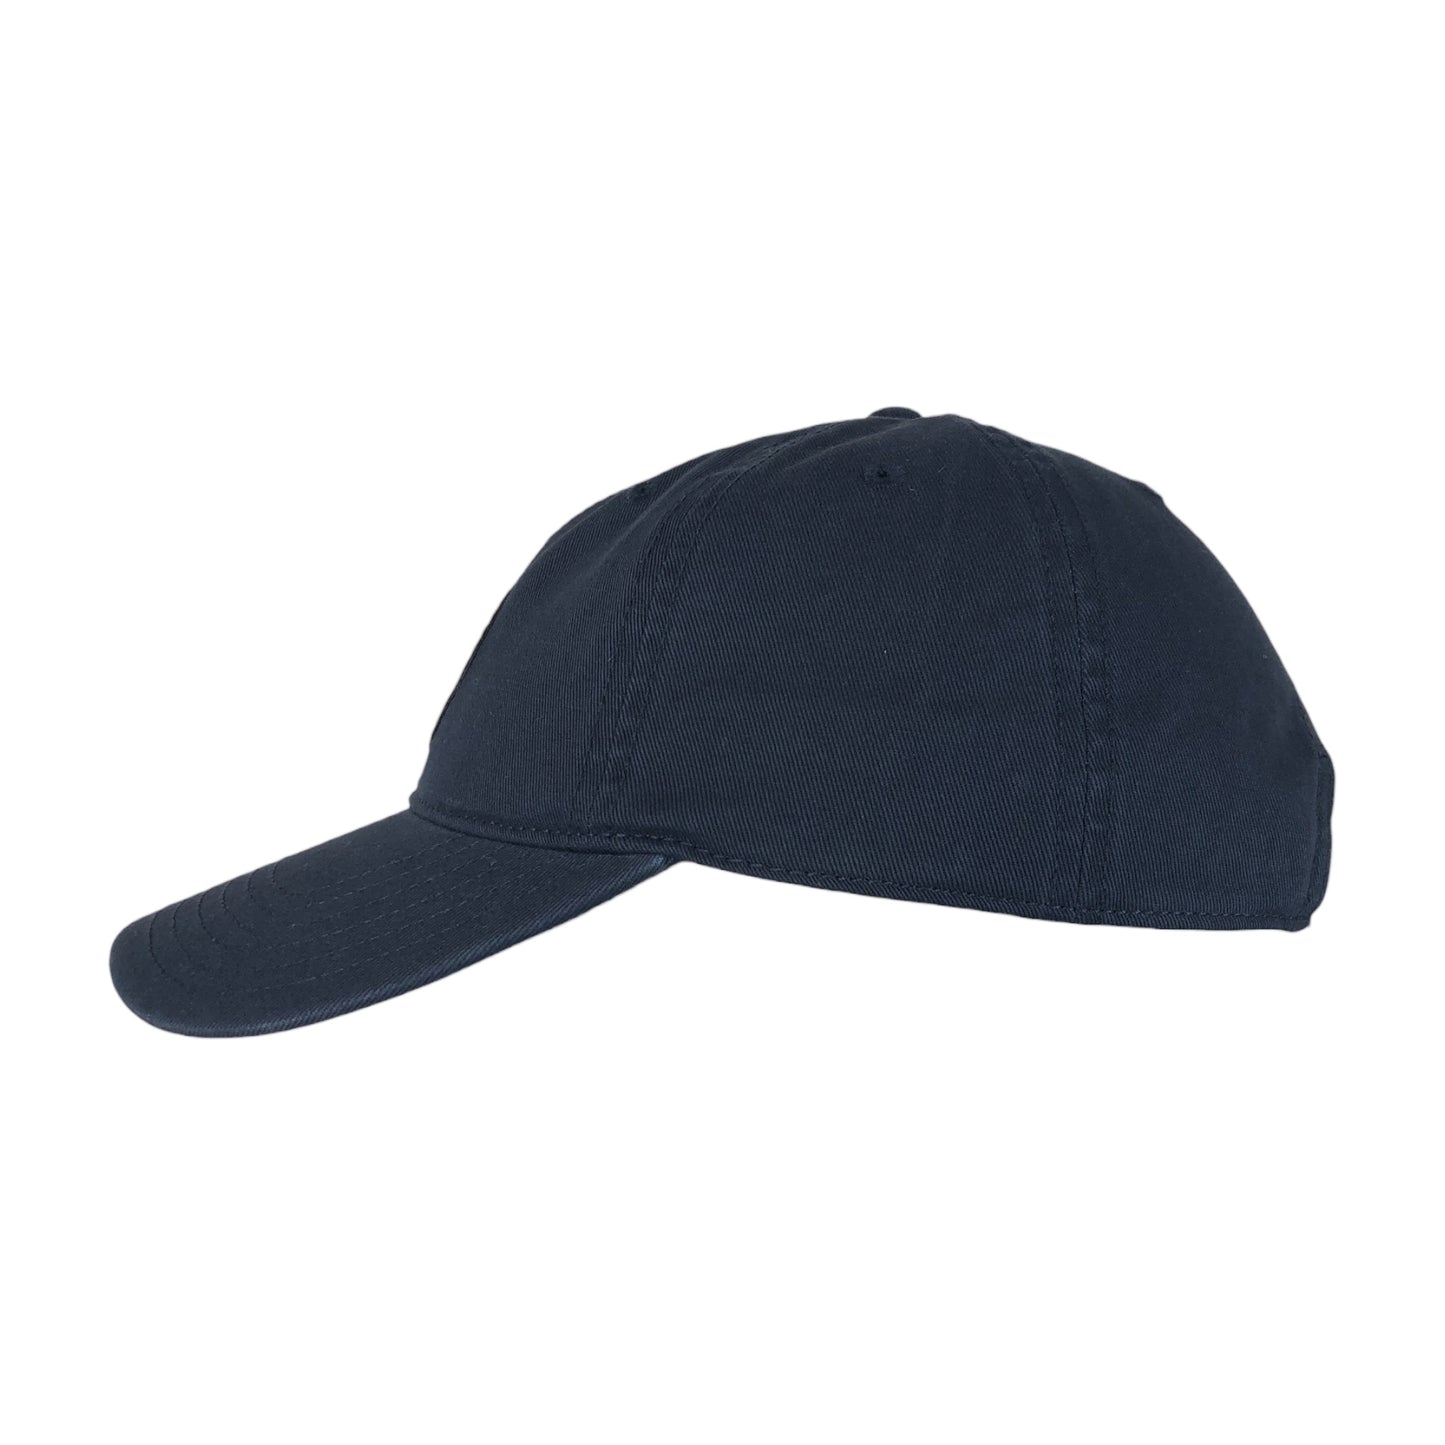 Side of the DubSea Fish Sticks navy blue adjustable dad hat.